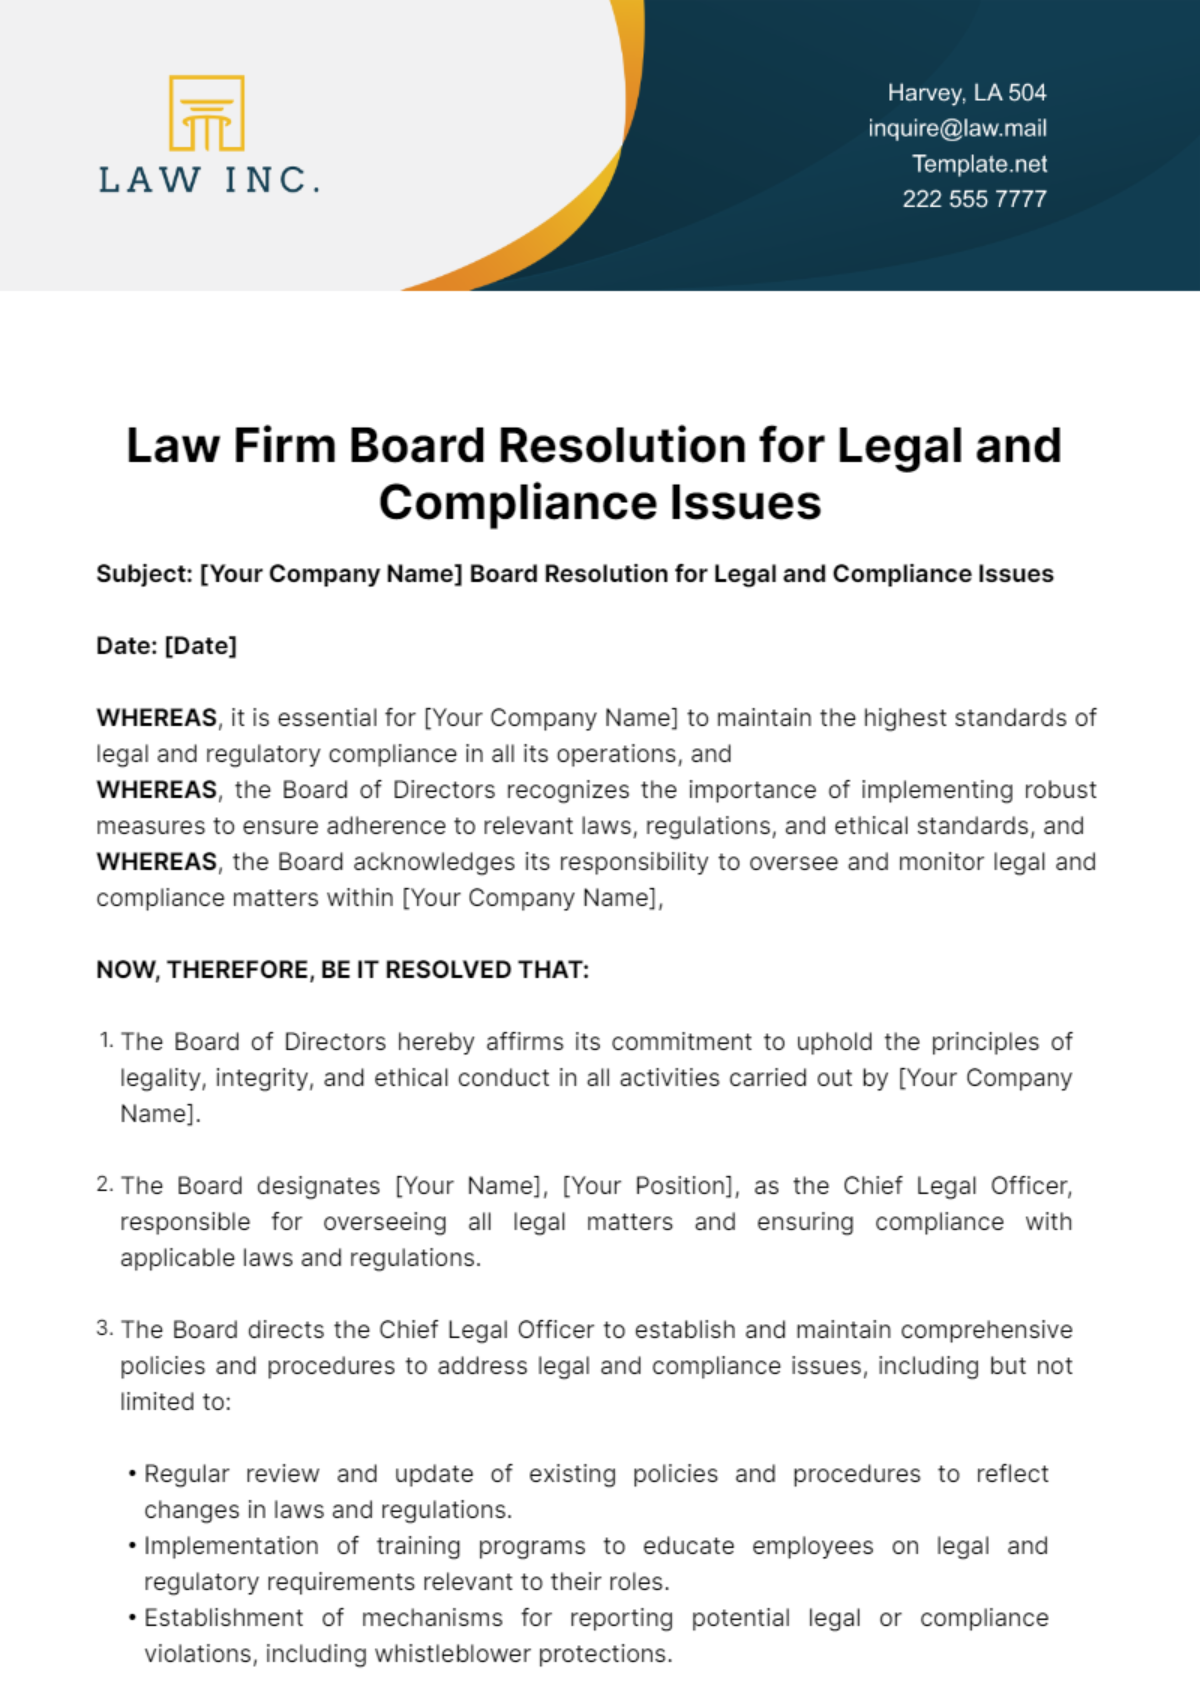 Law Firm Board Resolution for Legal and Compliance Issues Template